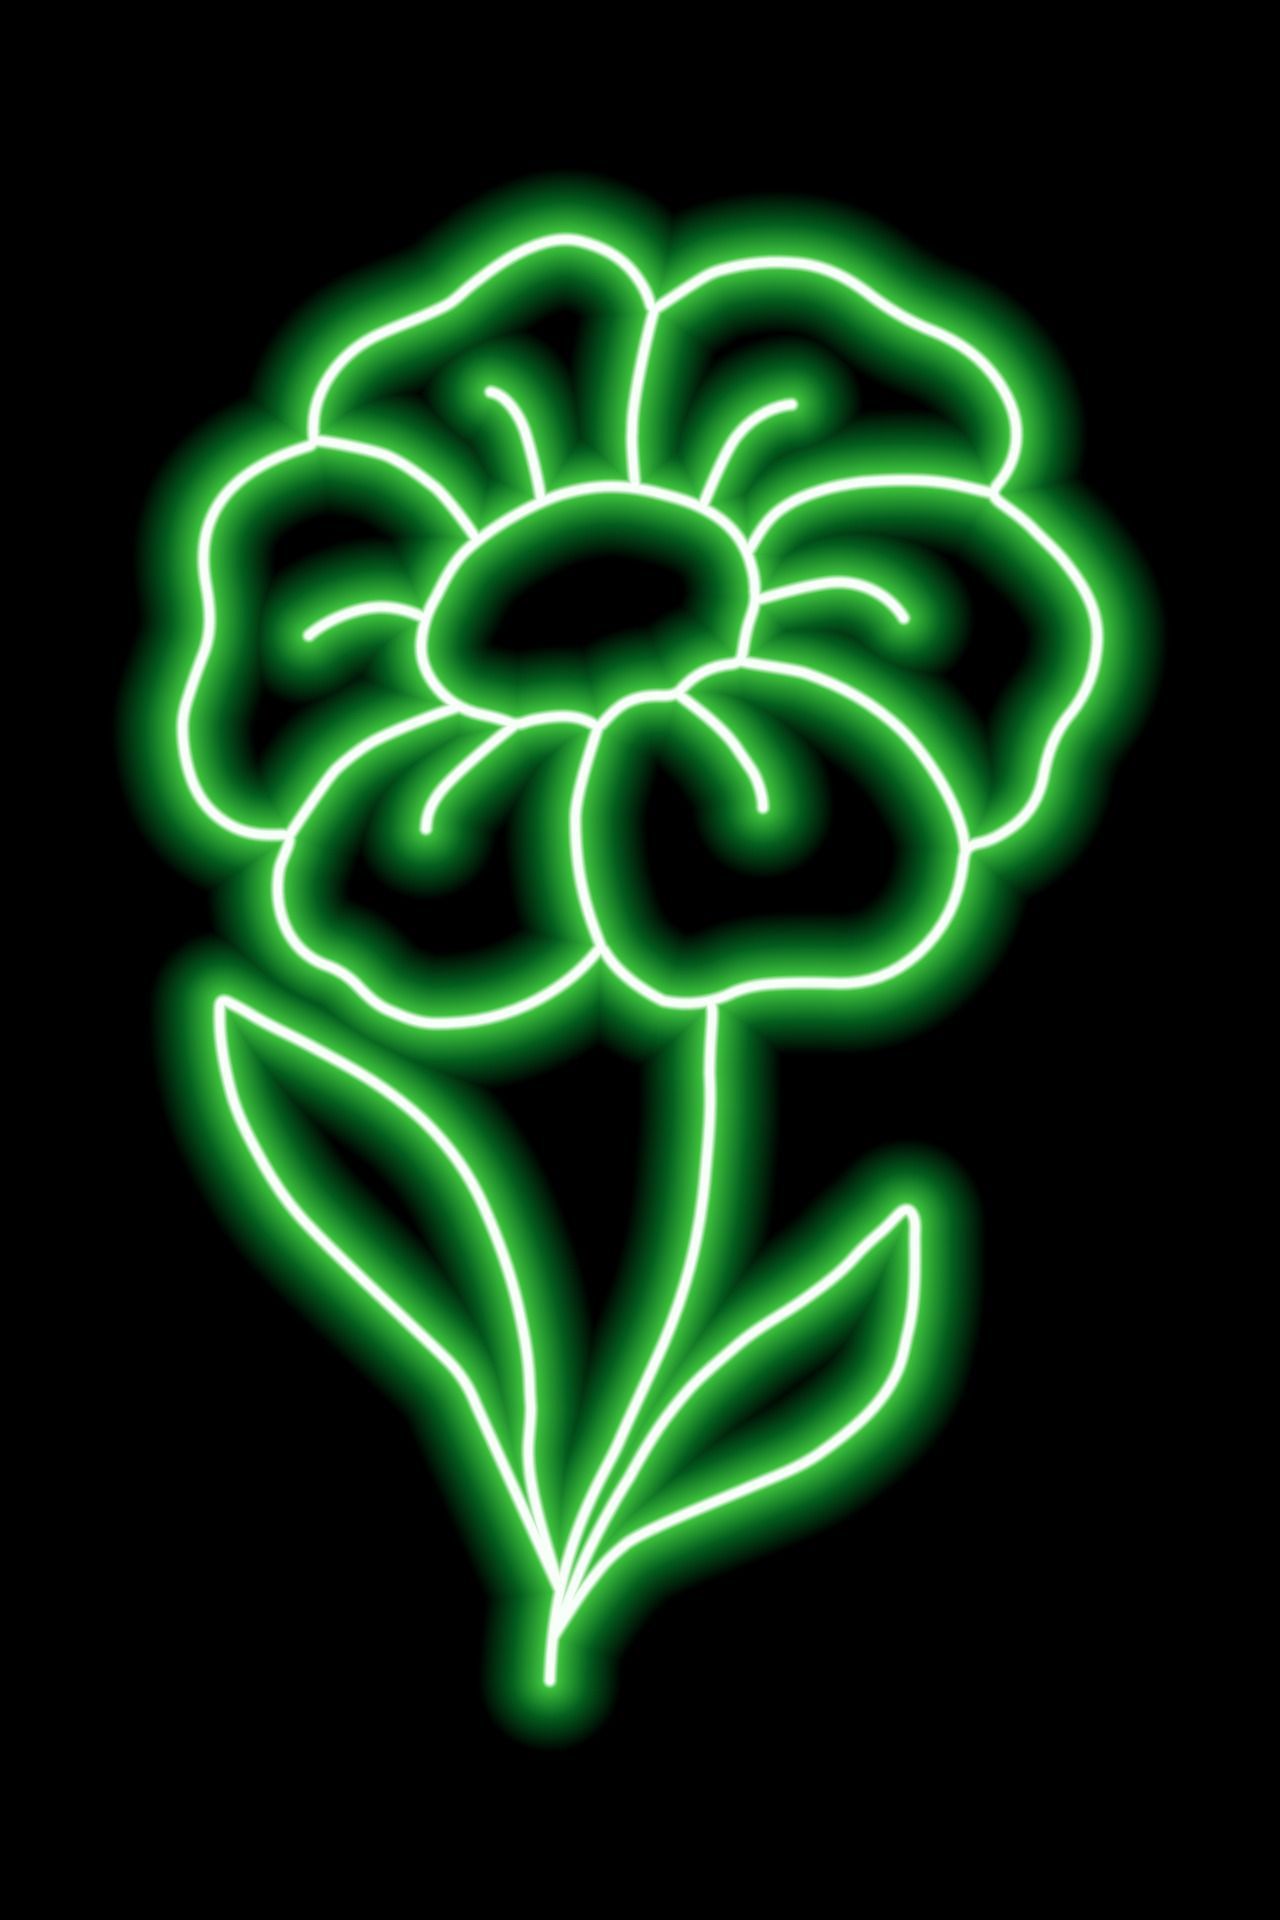 Neon green flower with petals and leaves on a black background. Simple illustration